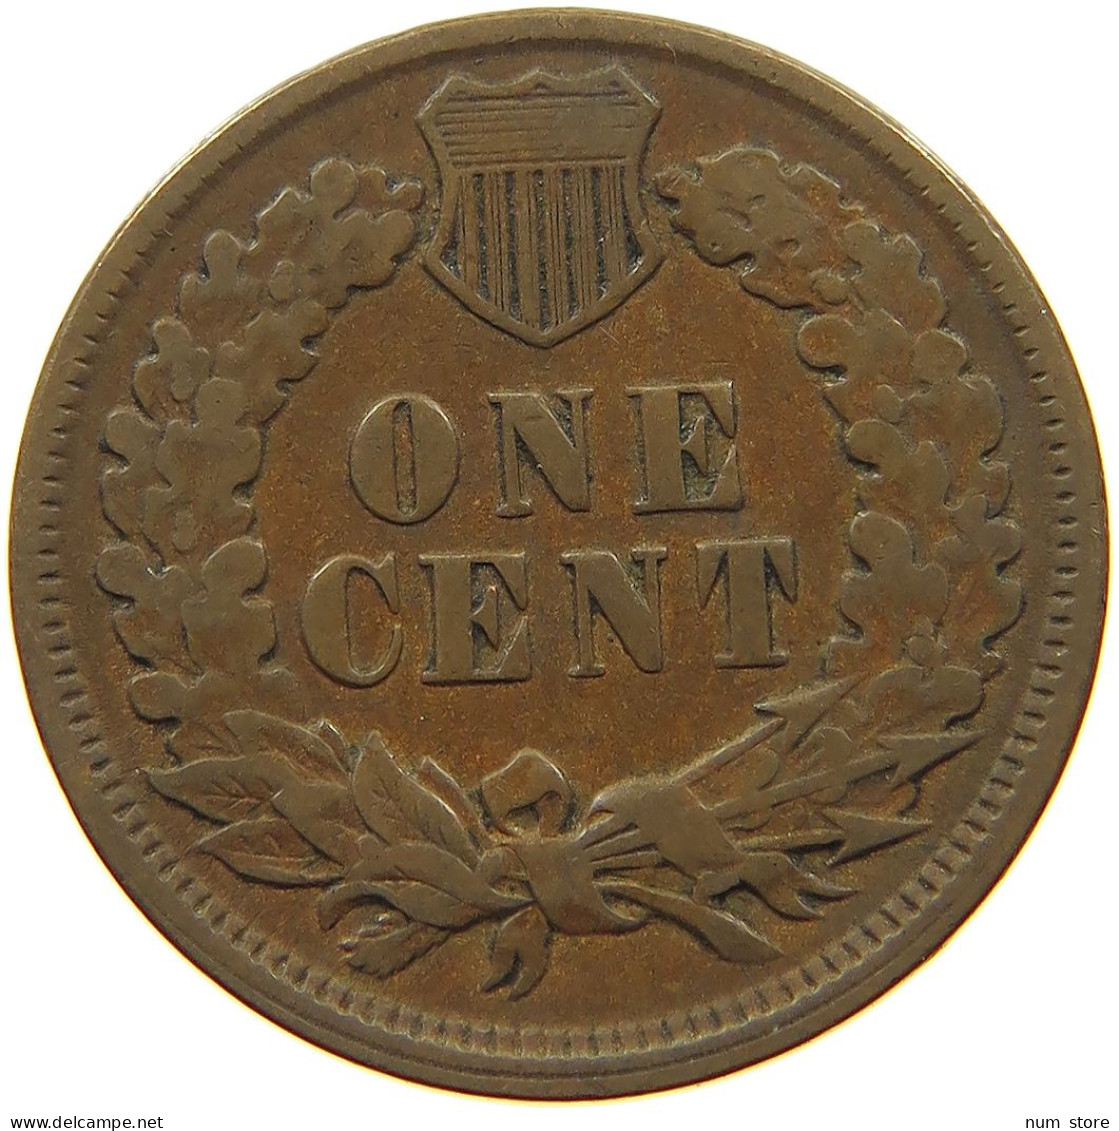 UNITED STATES OF AMERICA CENT 1892 INDIAN HEAD #c082 0271 - 1859-1909: Indian Head